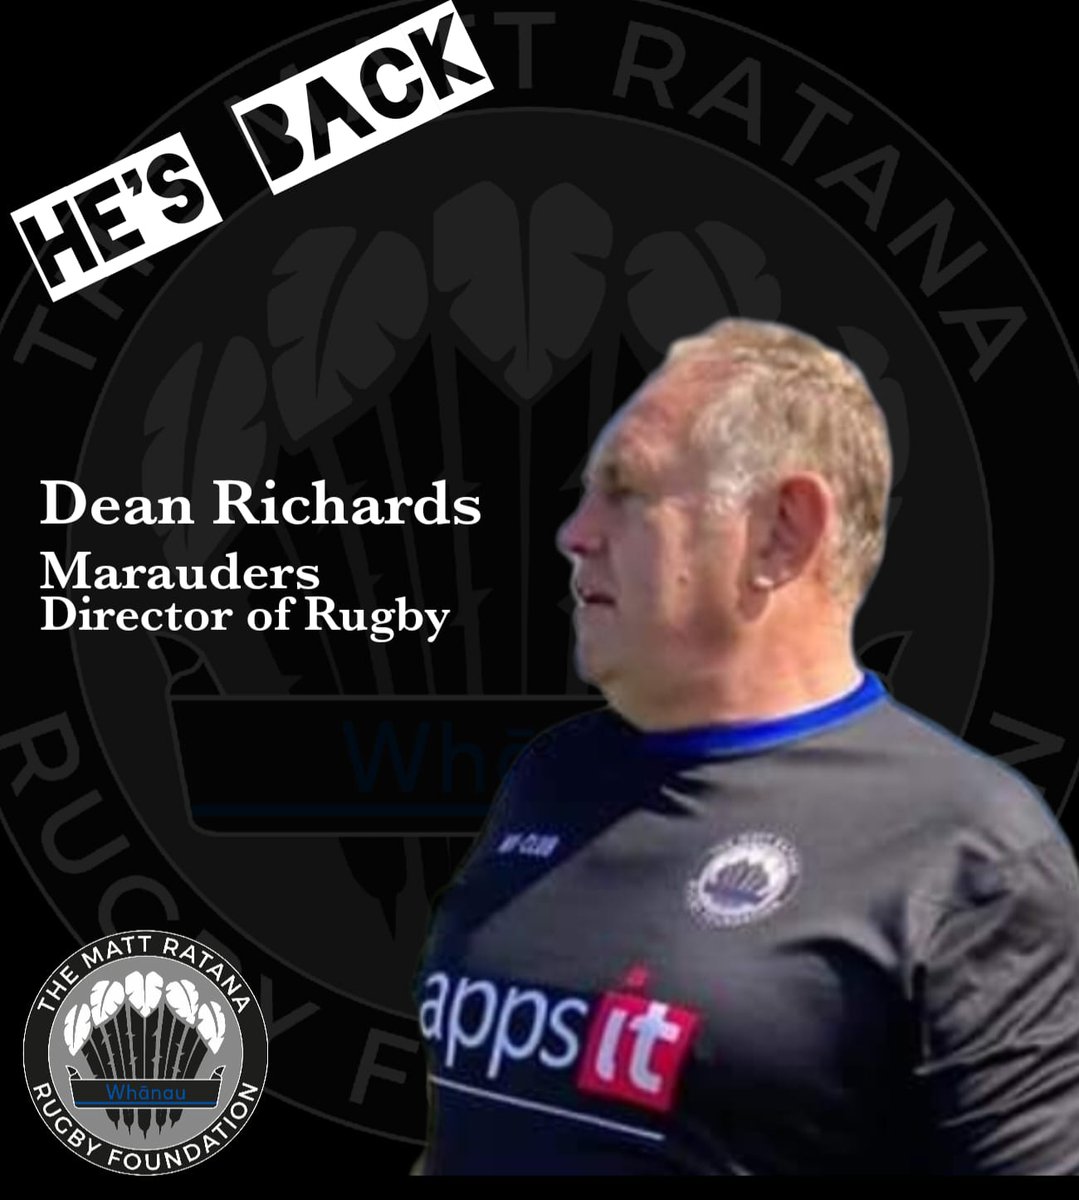 We've got big news for the Marauders! We are delighted to announce Dean Richards is returning as our Director of Rugby and Bath/England/Lions Forward Danny Grewcock as our new Head Coach! Good luck fellas and welcome! #try4matt #marauders #mattratanarugby